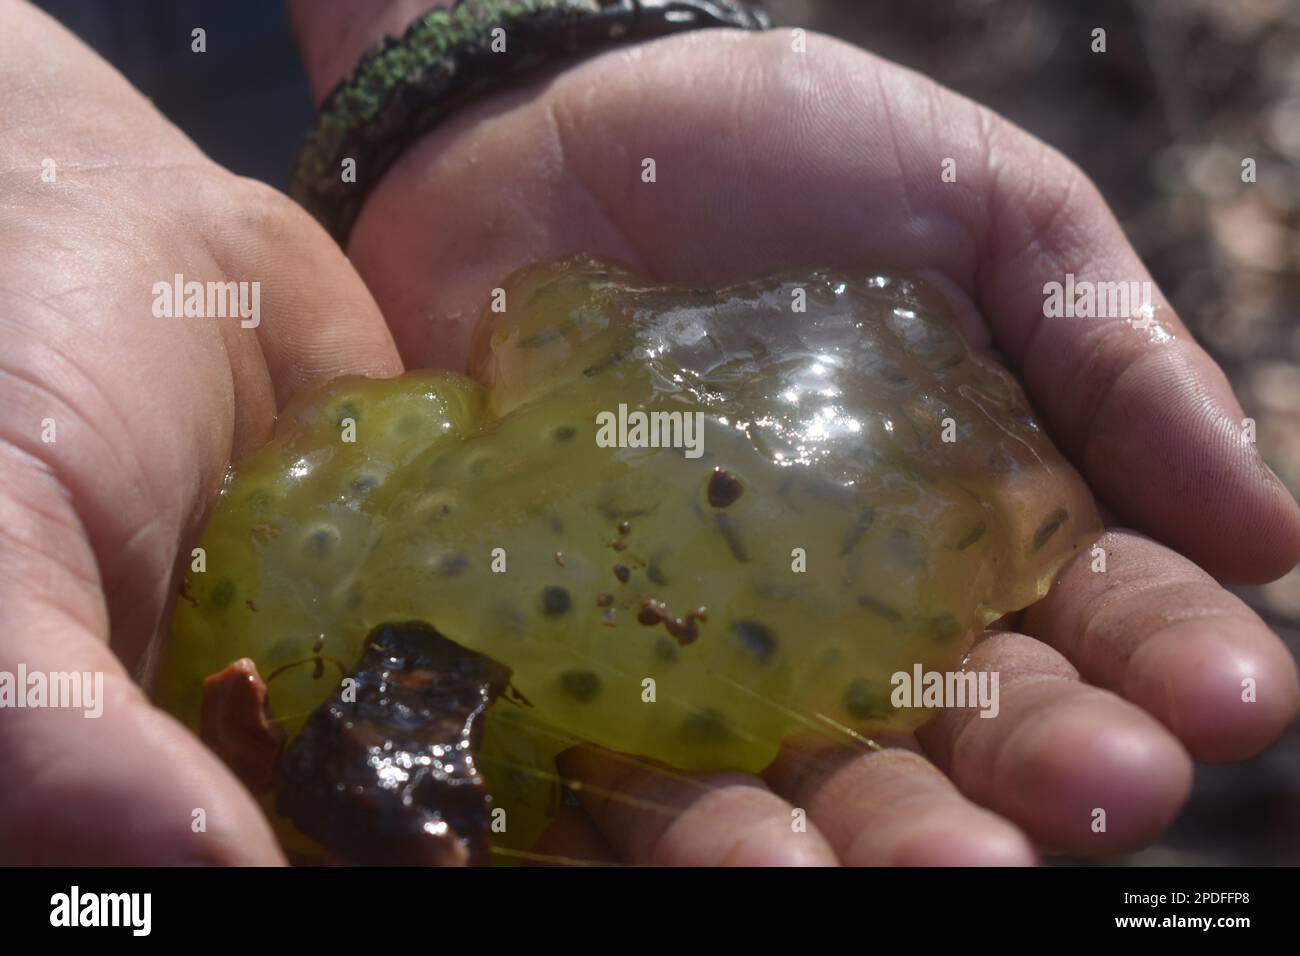 A clutch of frog eggs that were found in a creek in rural Missouri, MO, United States, US, USA, are being held up in a pair of hands. Stock Photo